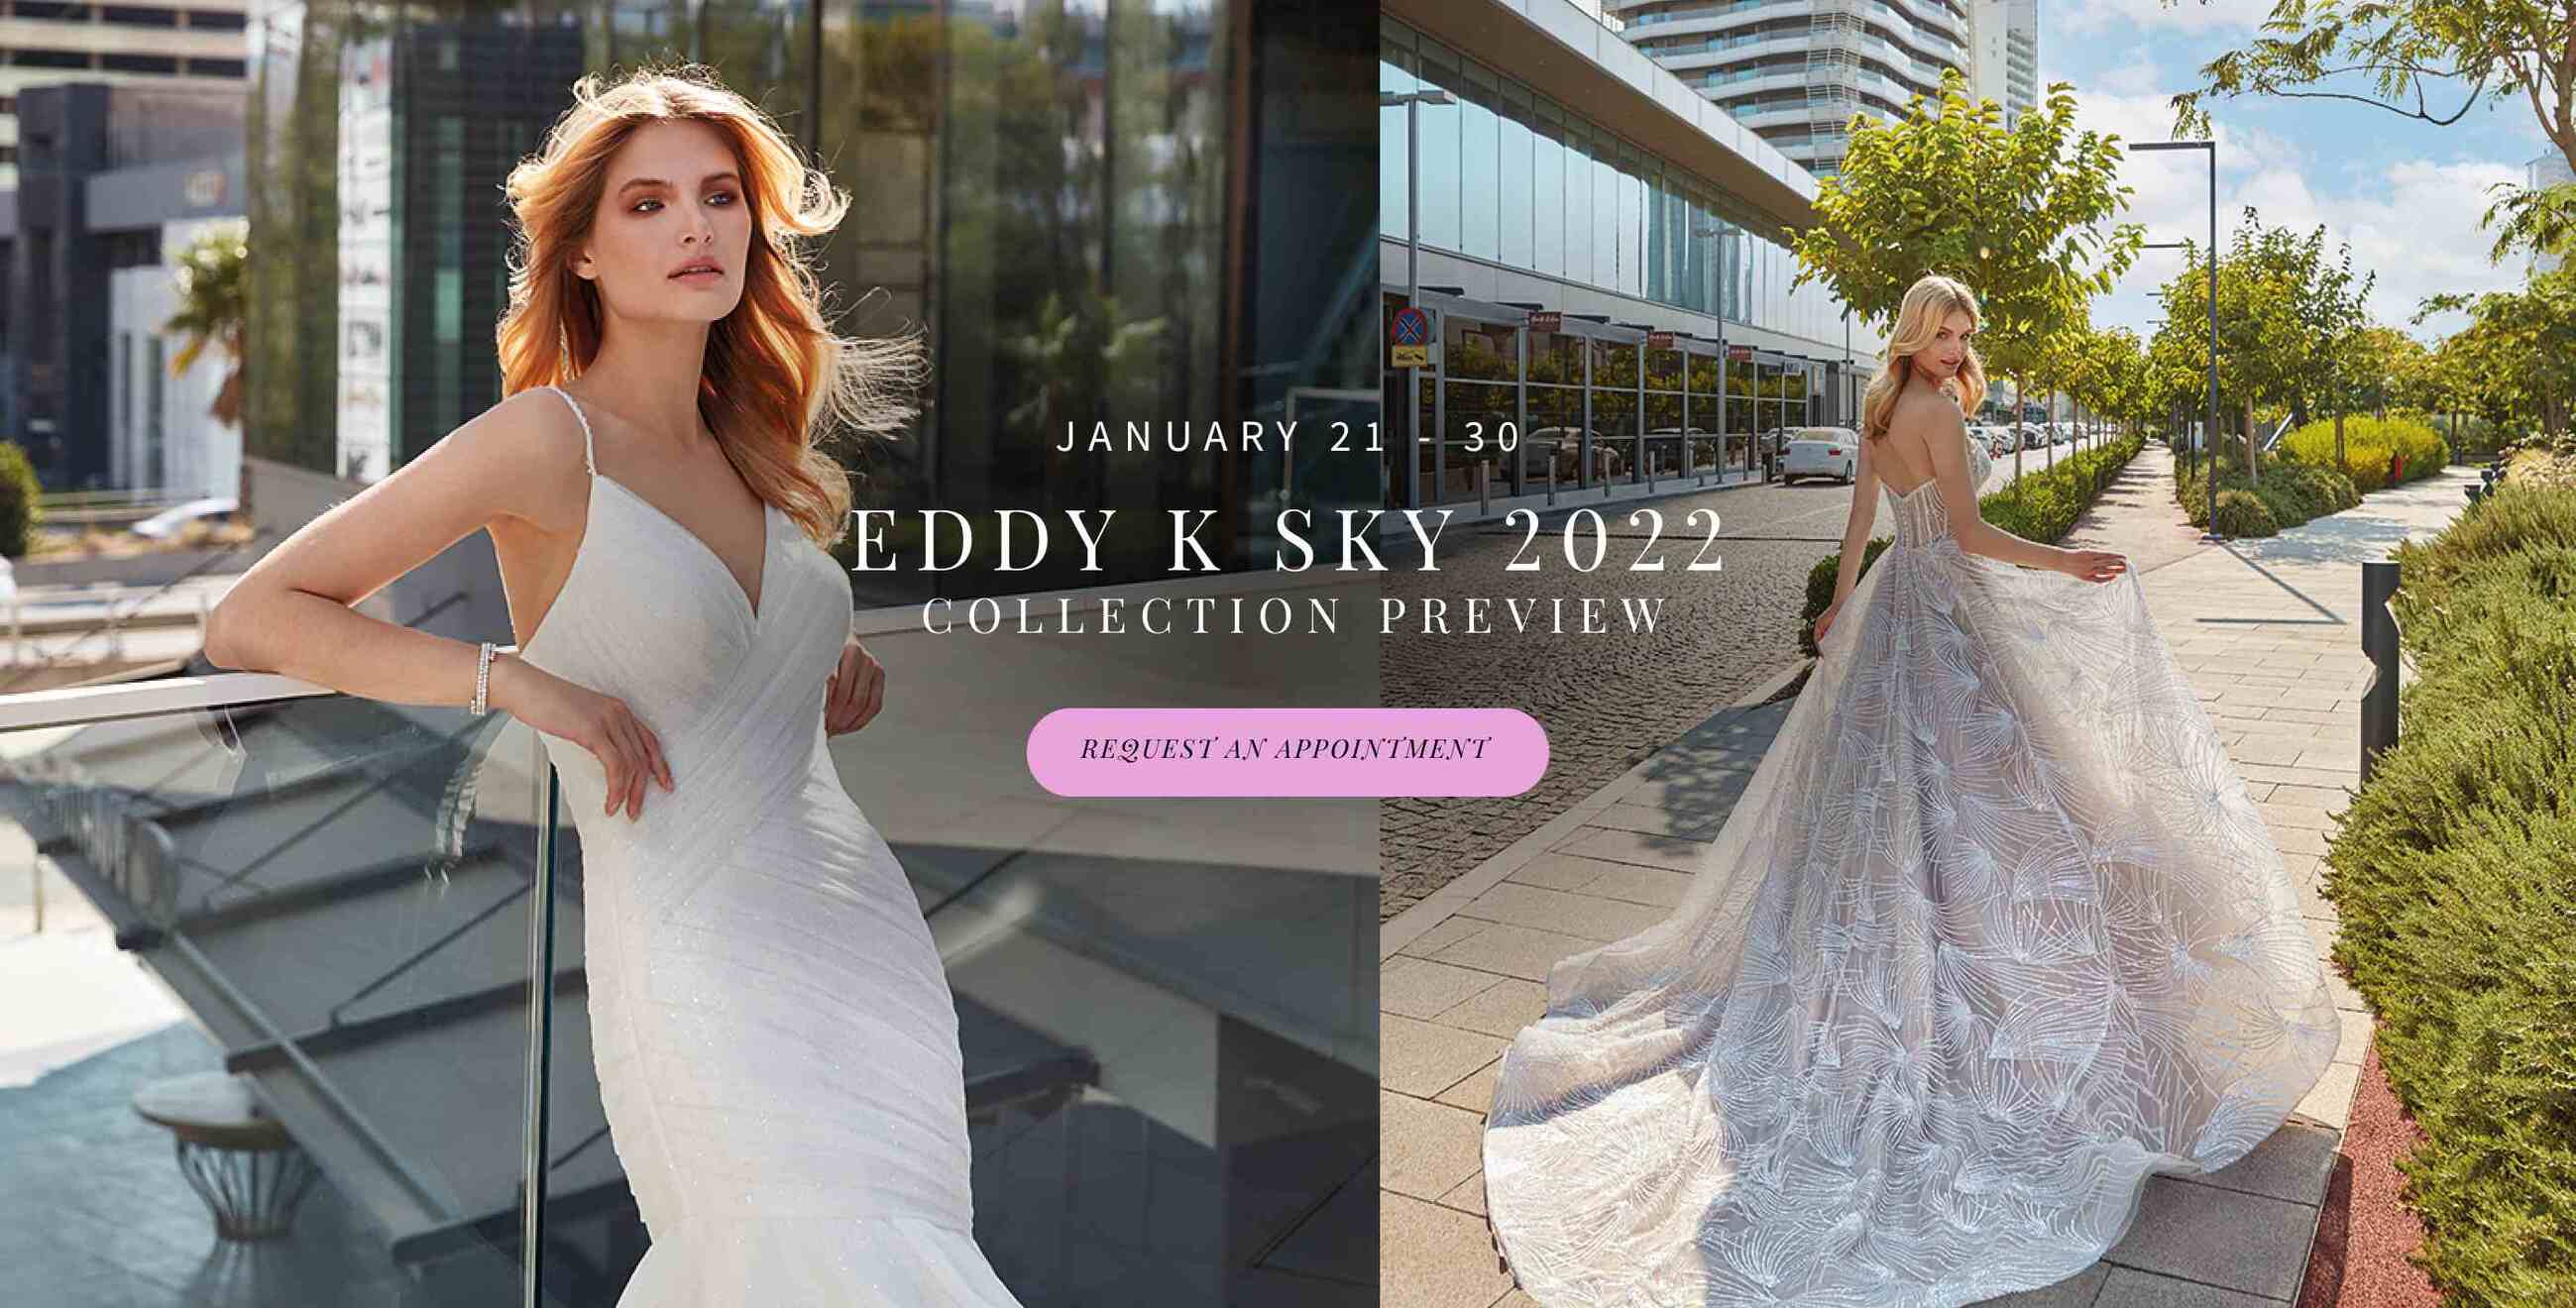 Eddy K Sky 2022 collection preview at Trudys Brides. Desktop Image.